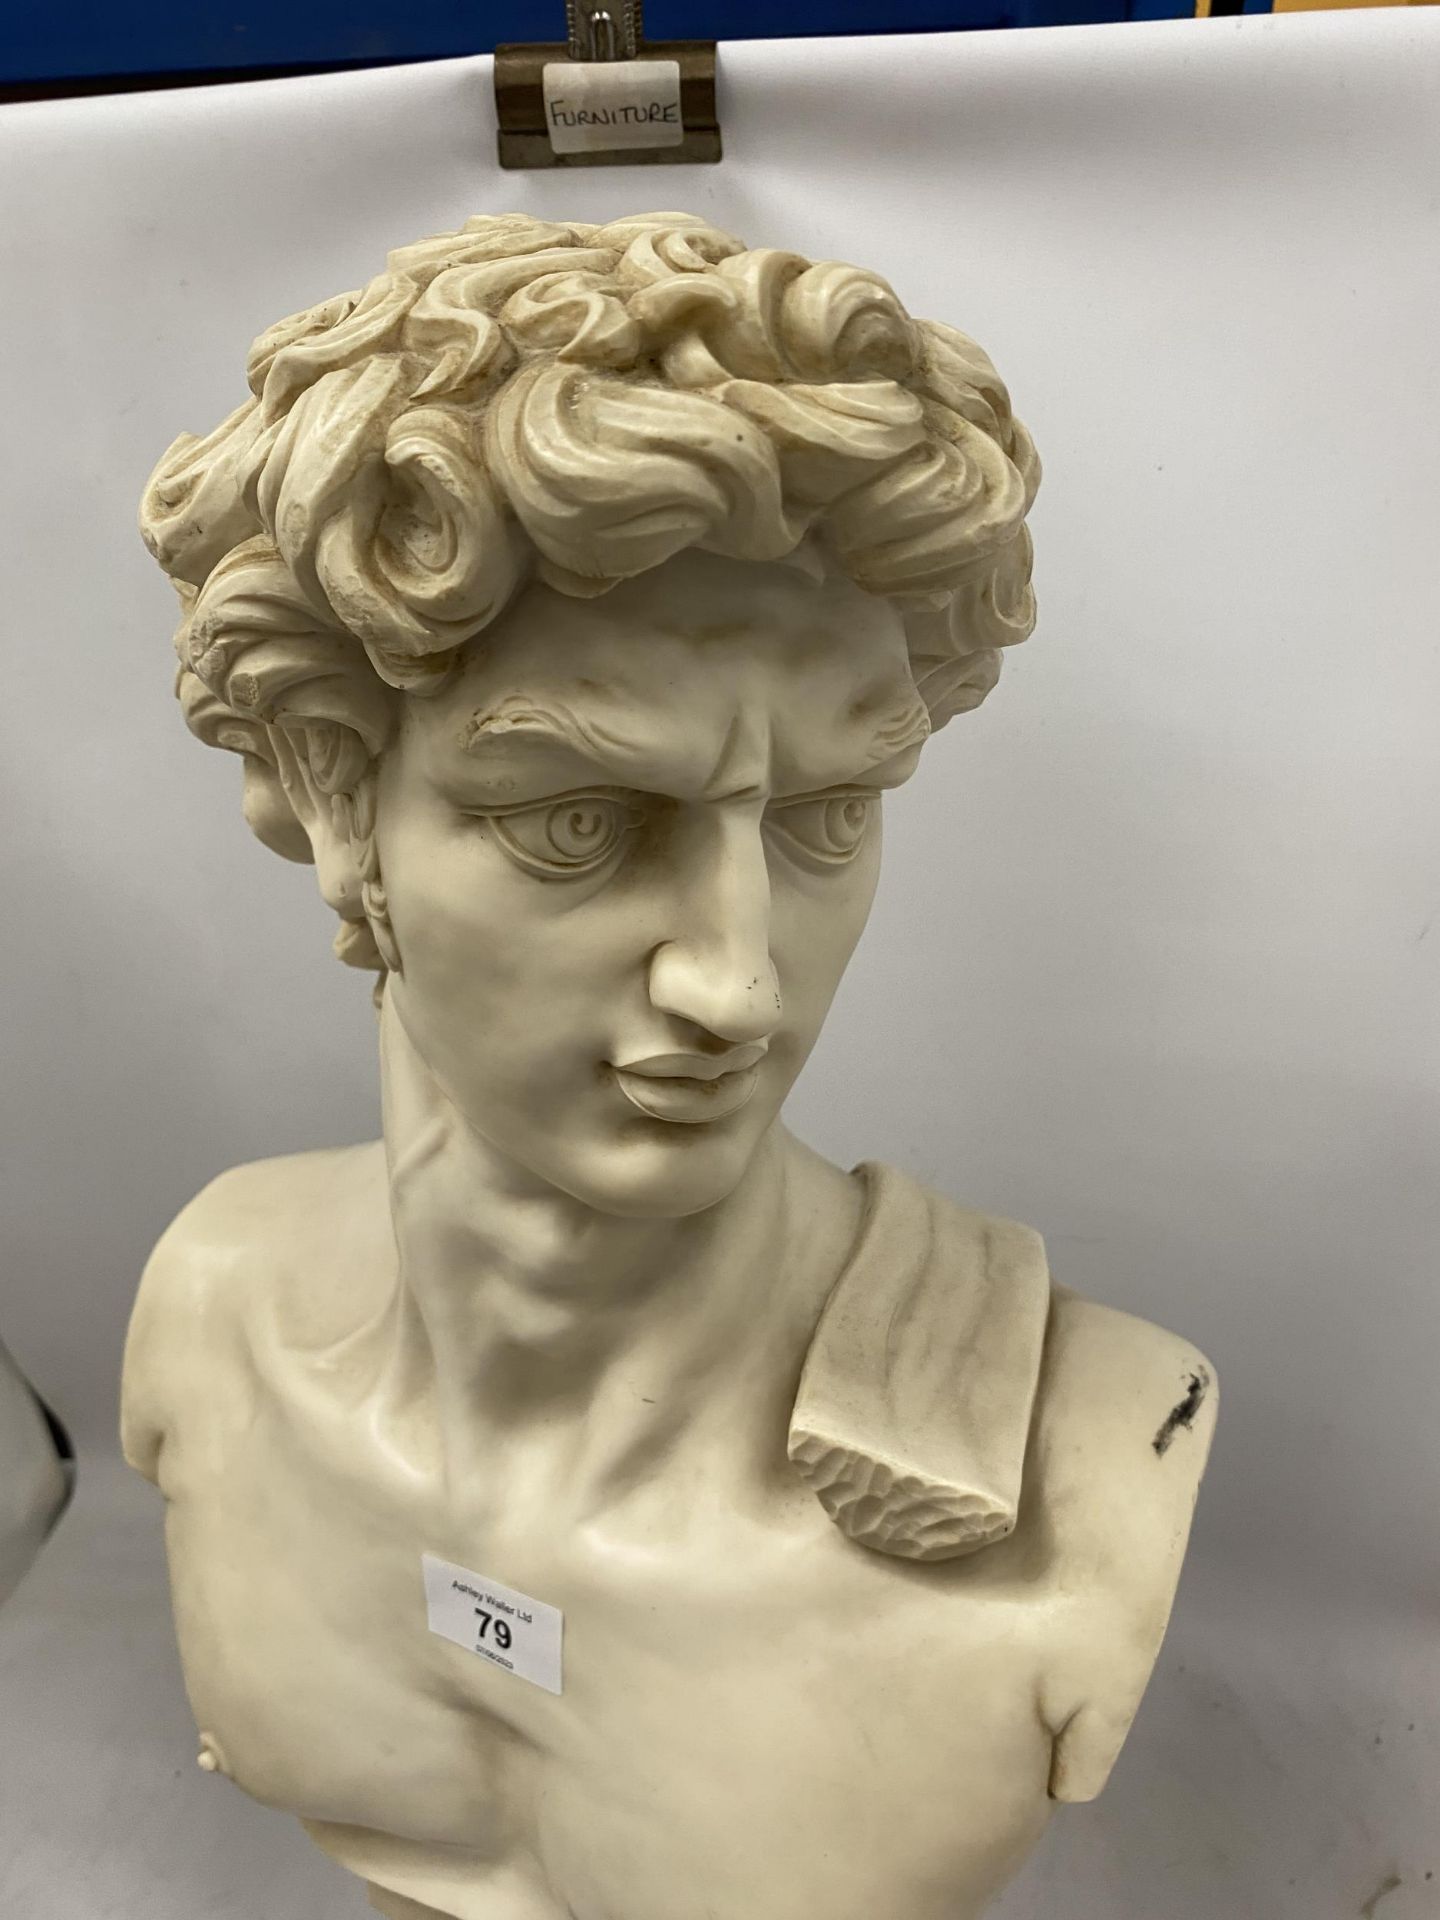 A LARGE DECORATIVE HEAVY RESIN BUST OF DAVID, HEIGHT 53CM - Image 2 of 5